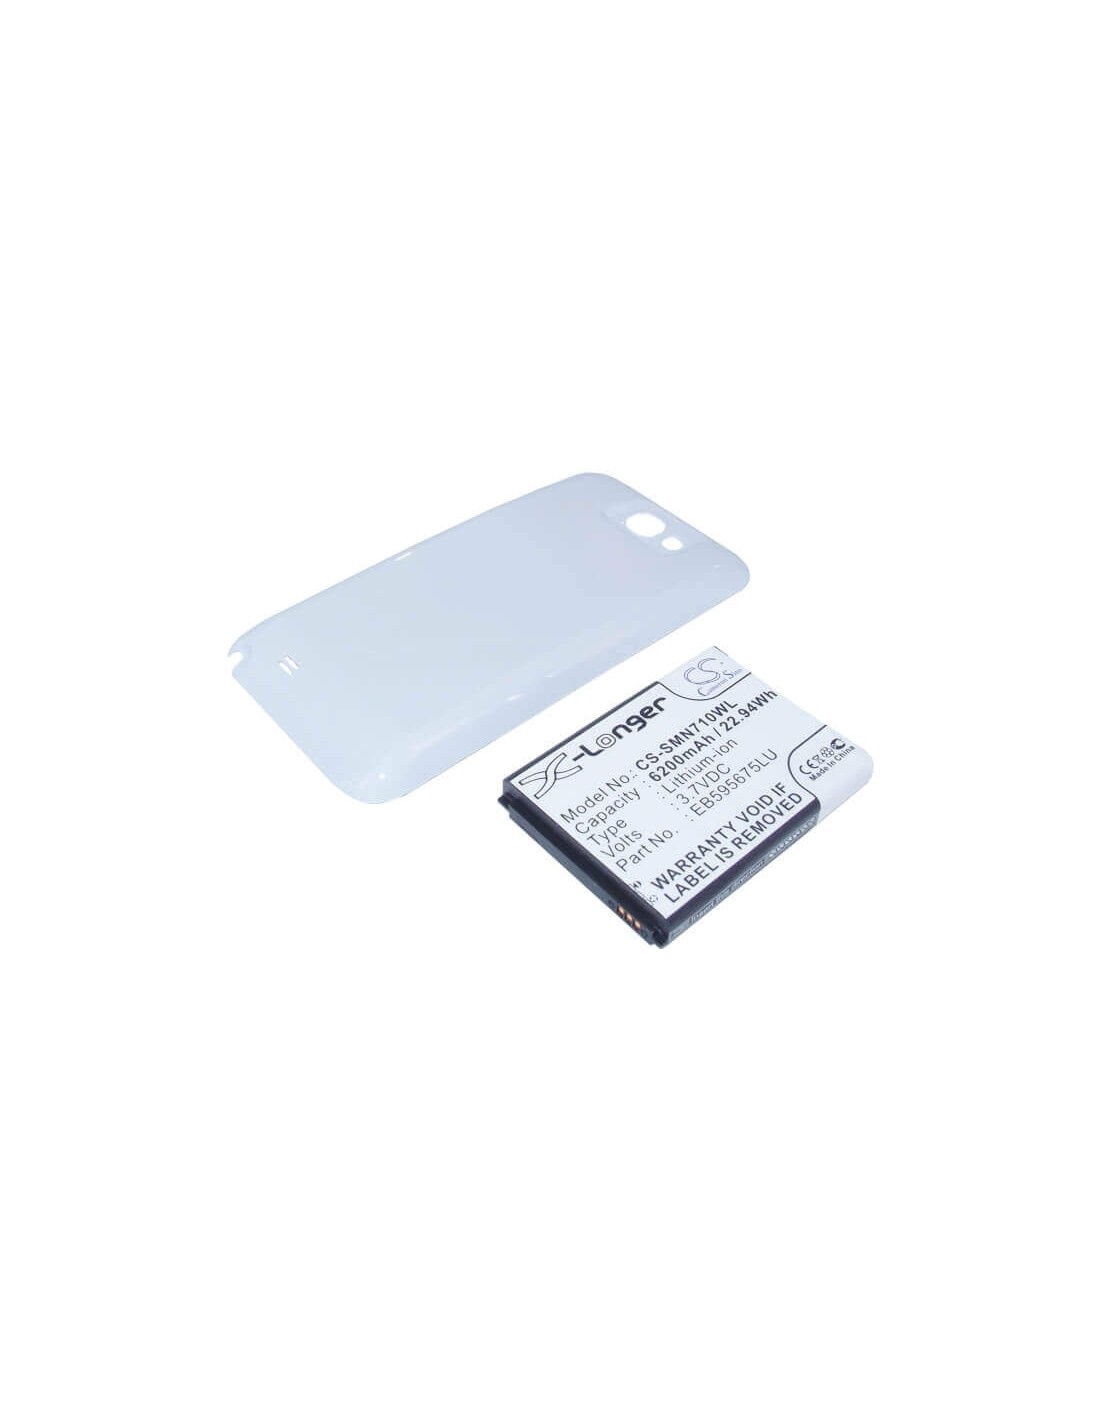 Battery for Samsung GT-N7100, GT-N7105, Galaxy Note II LTE 32GB white back cover 3.7V, 6200mAh - 22.94Wh